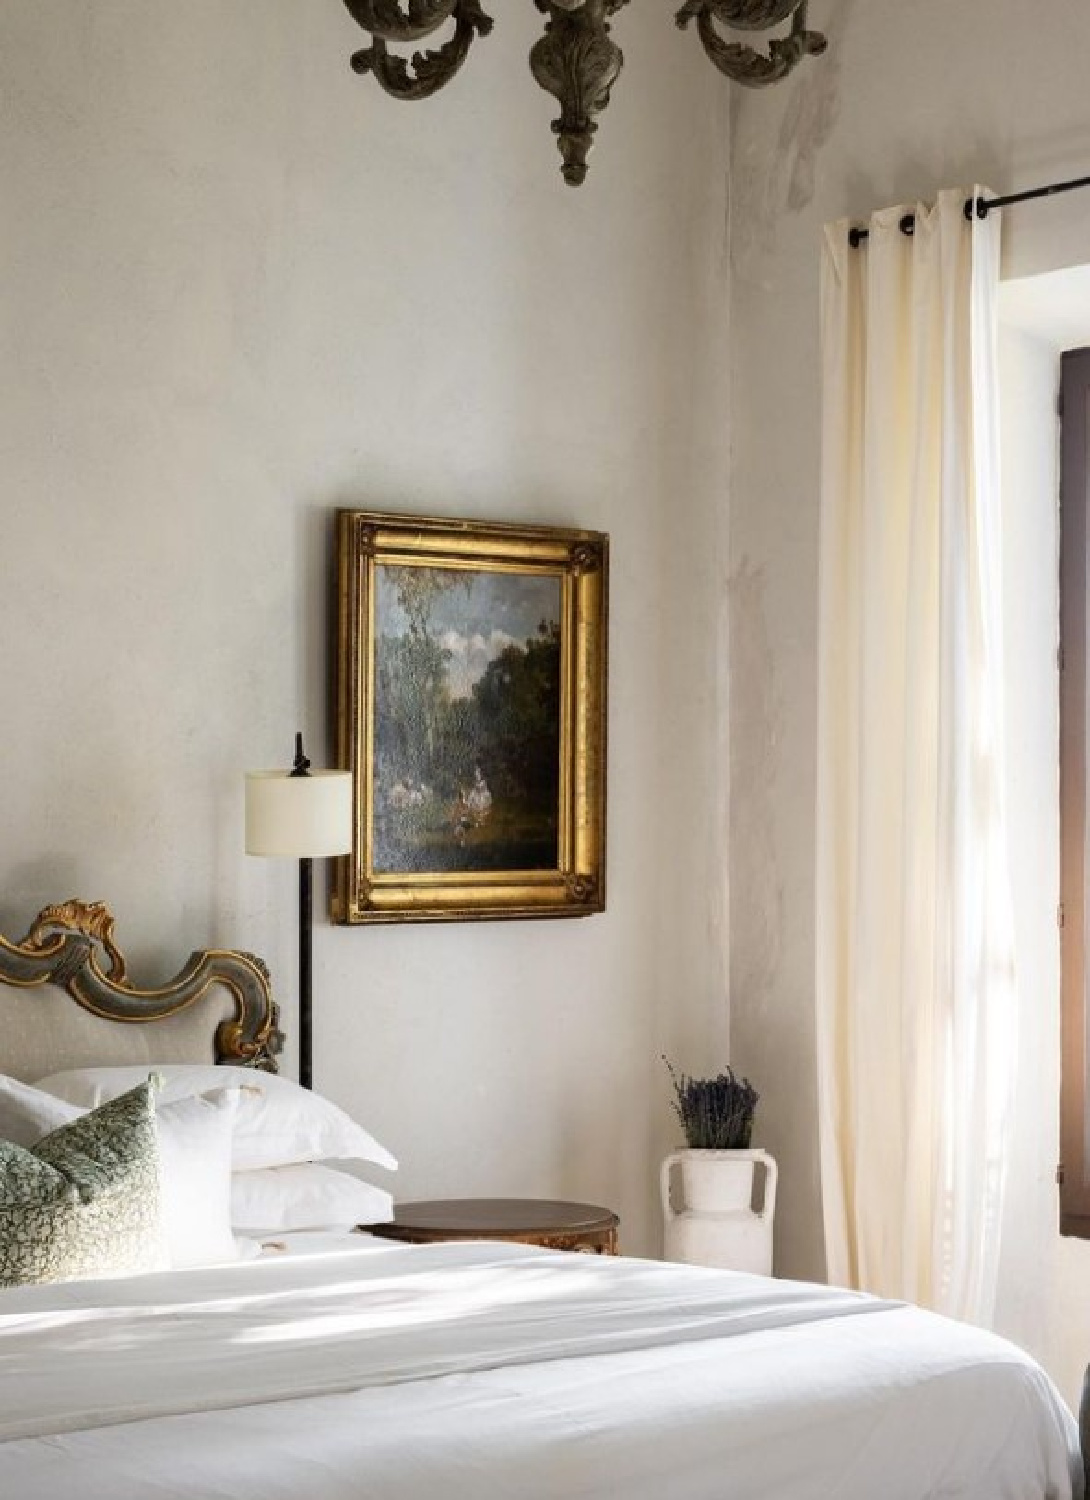 Creamy walls in a pale French country bedroom. Warm European luxury and cozy opulence in a French vacation villa in Provence - La Bastide de Laurence. #frenchbastide #frenchvilla #luxuryvilla #provencevilla #warmeuropeanluxury #cozyopulence #provencehomes #frenchcountryinterior